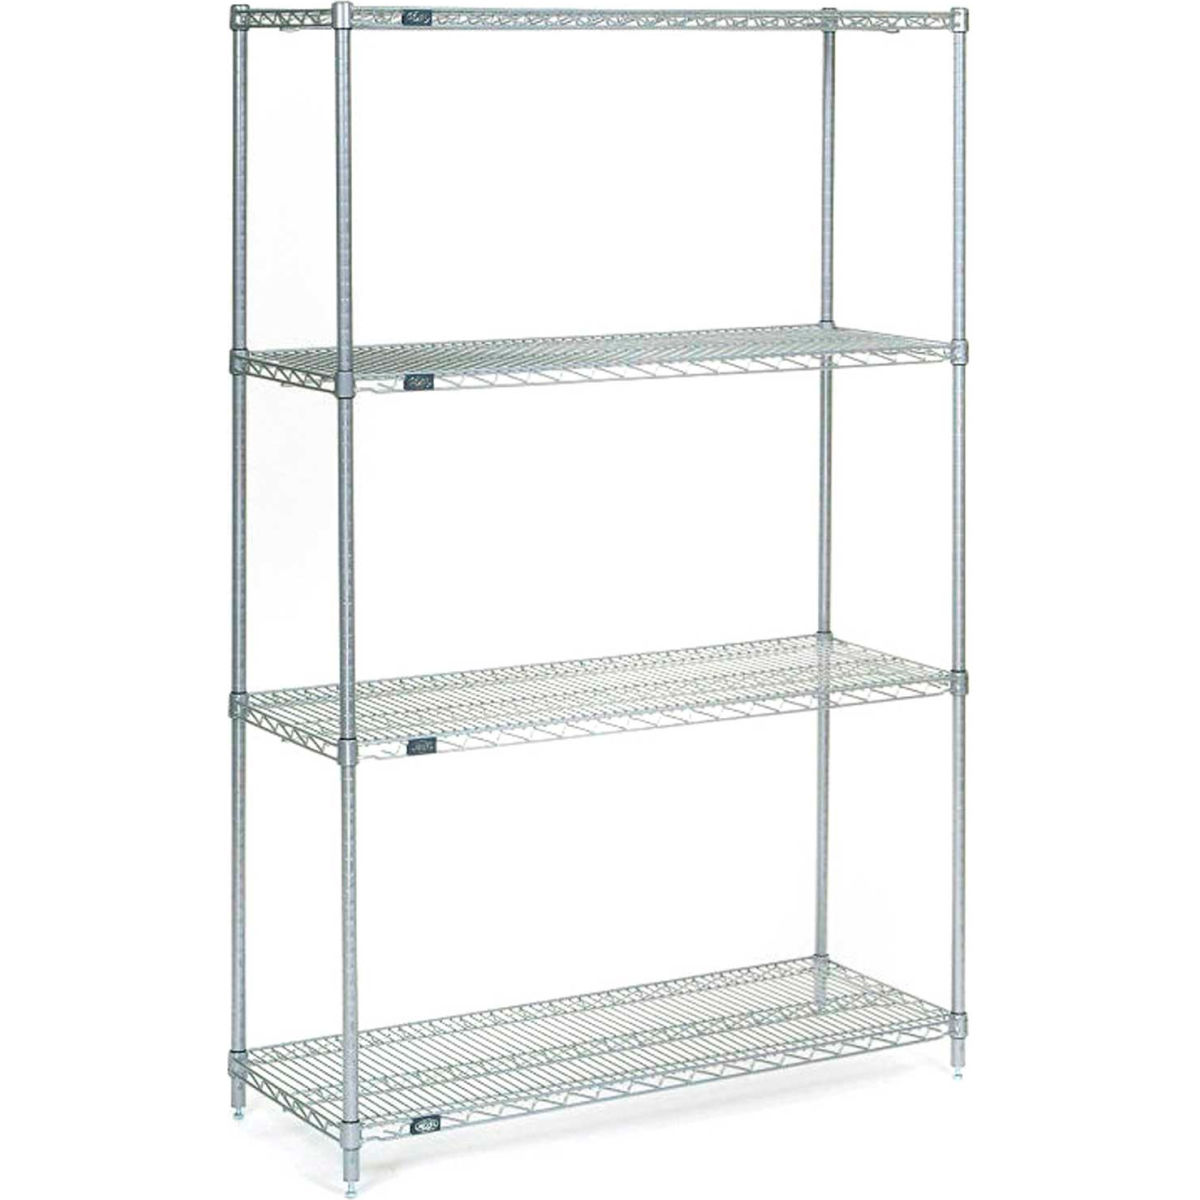 Picture of Global Industrial 14305S 54 x 30 x 14 in. Nexel Stainless Steel Starter Wire Shelving